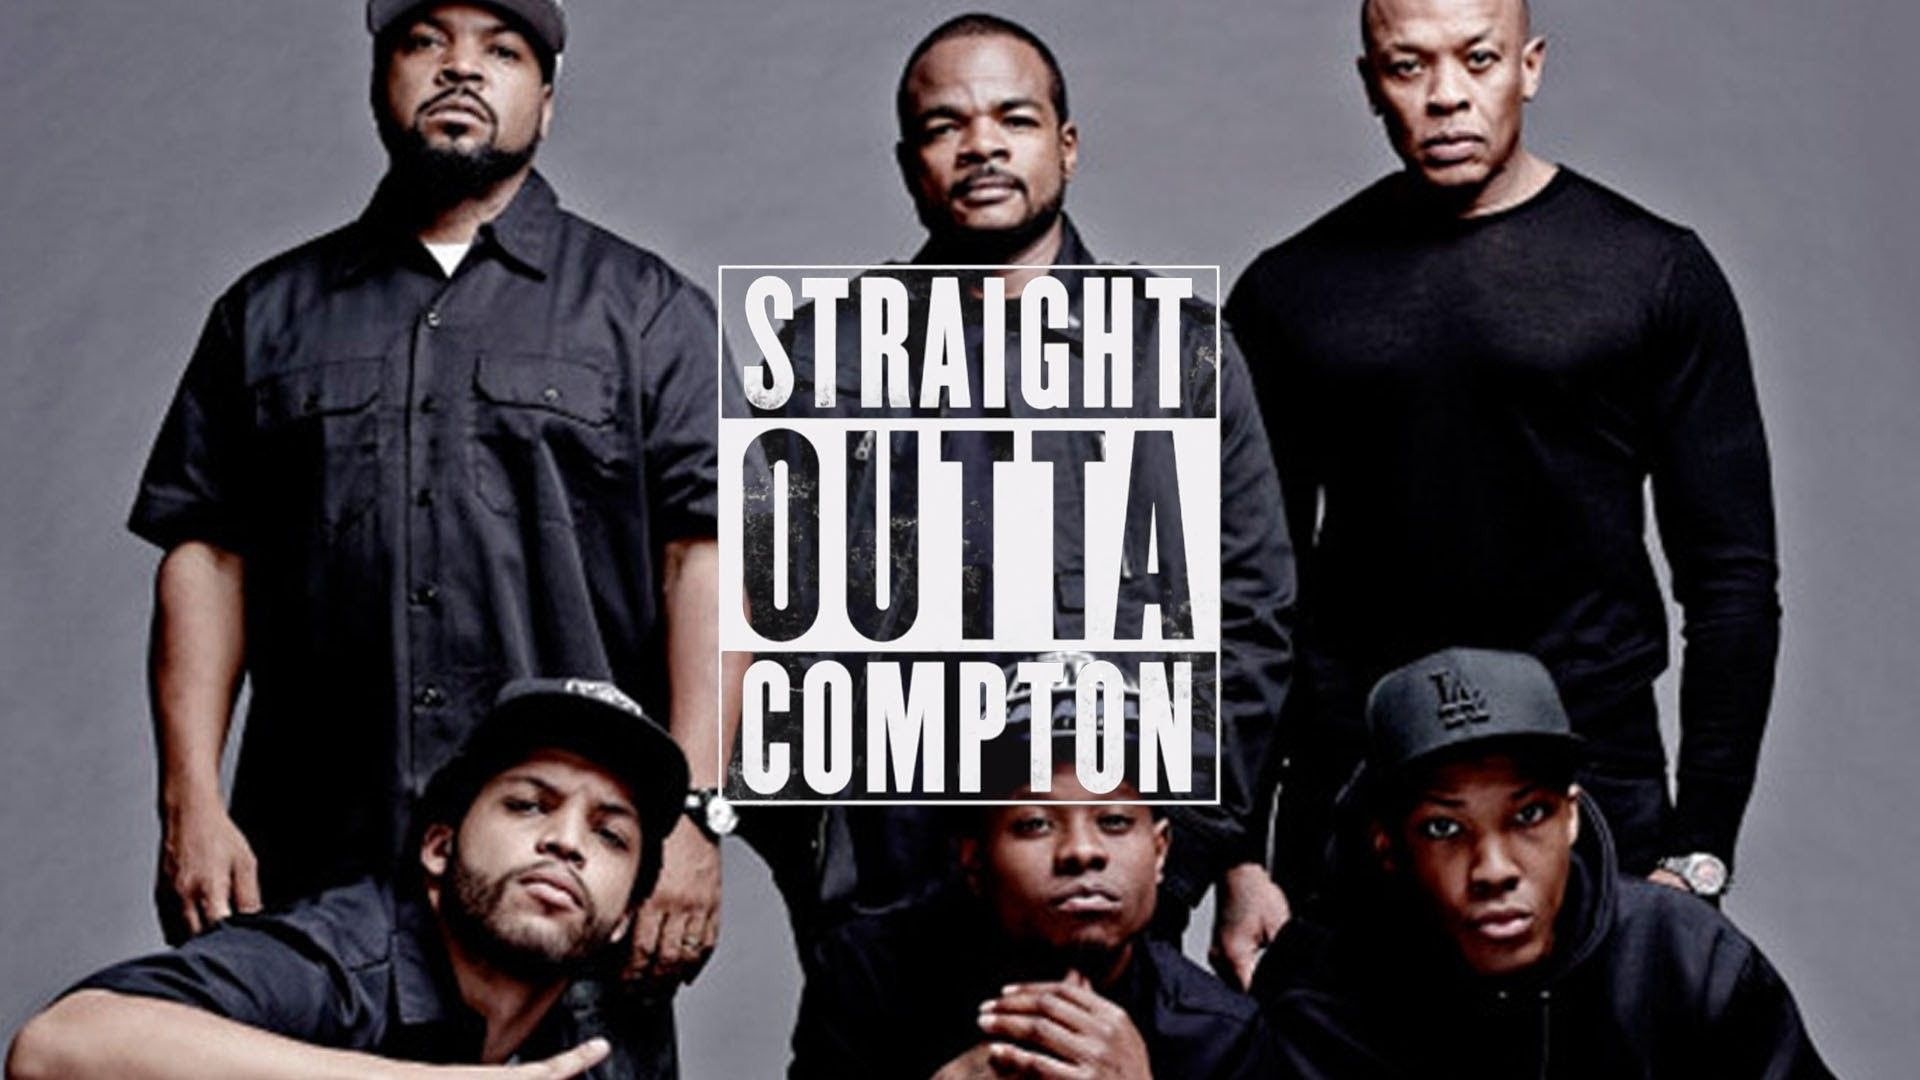 Wallpapers collection, Straight Outta Compton, Stylish design, Iconic images, 1920x1080 Full HD Desktop